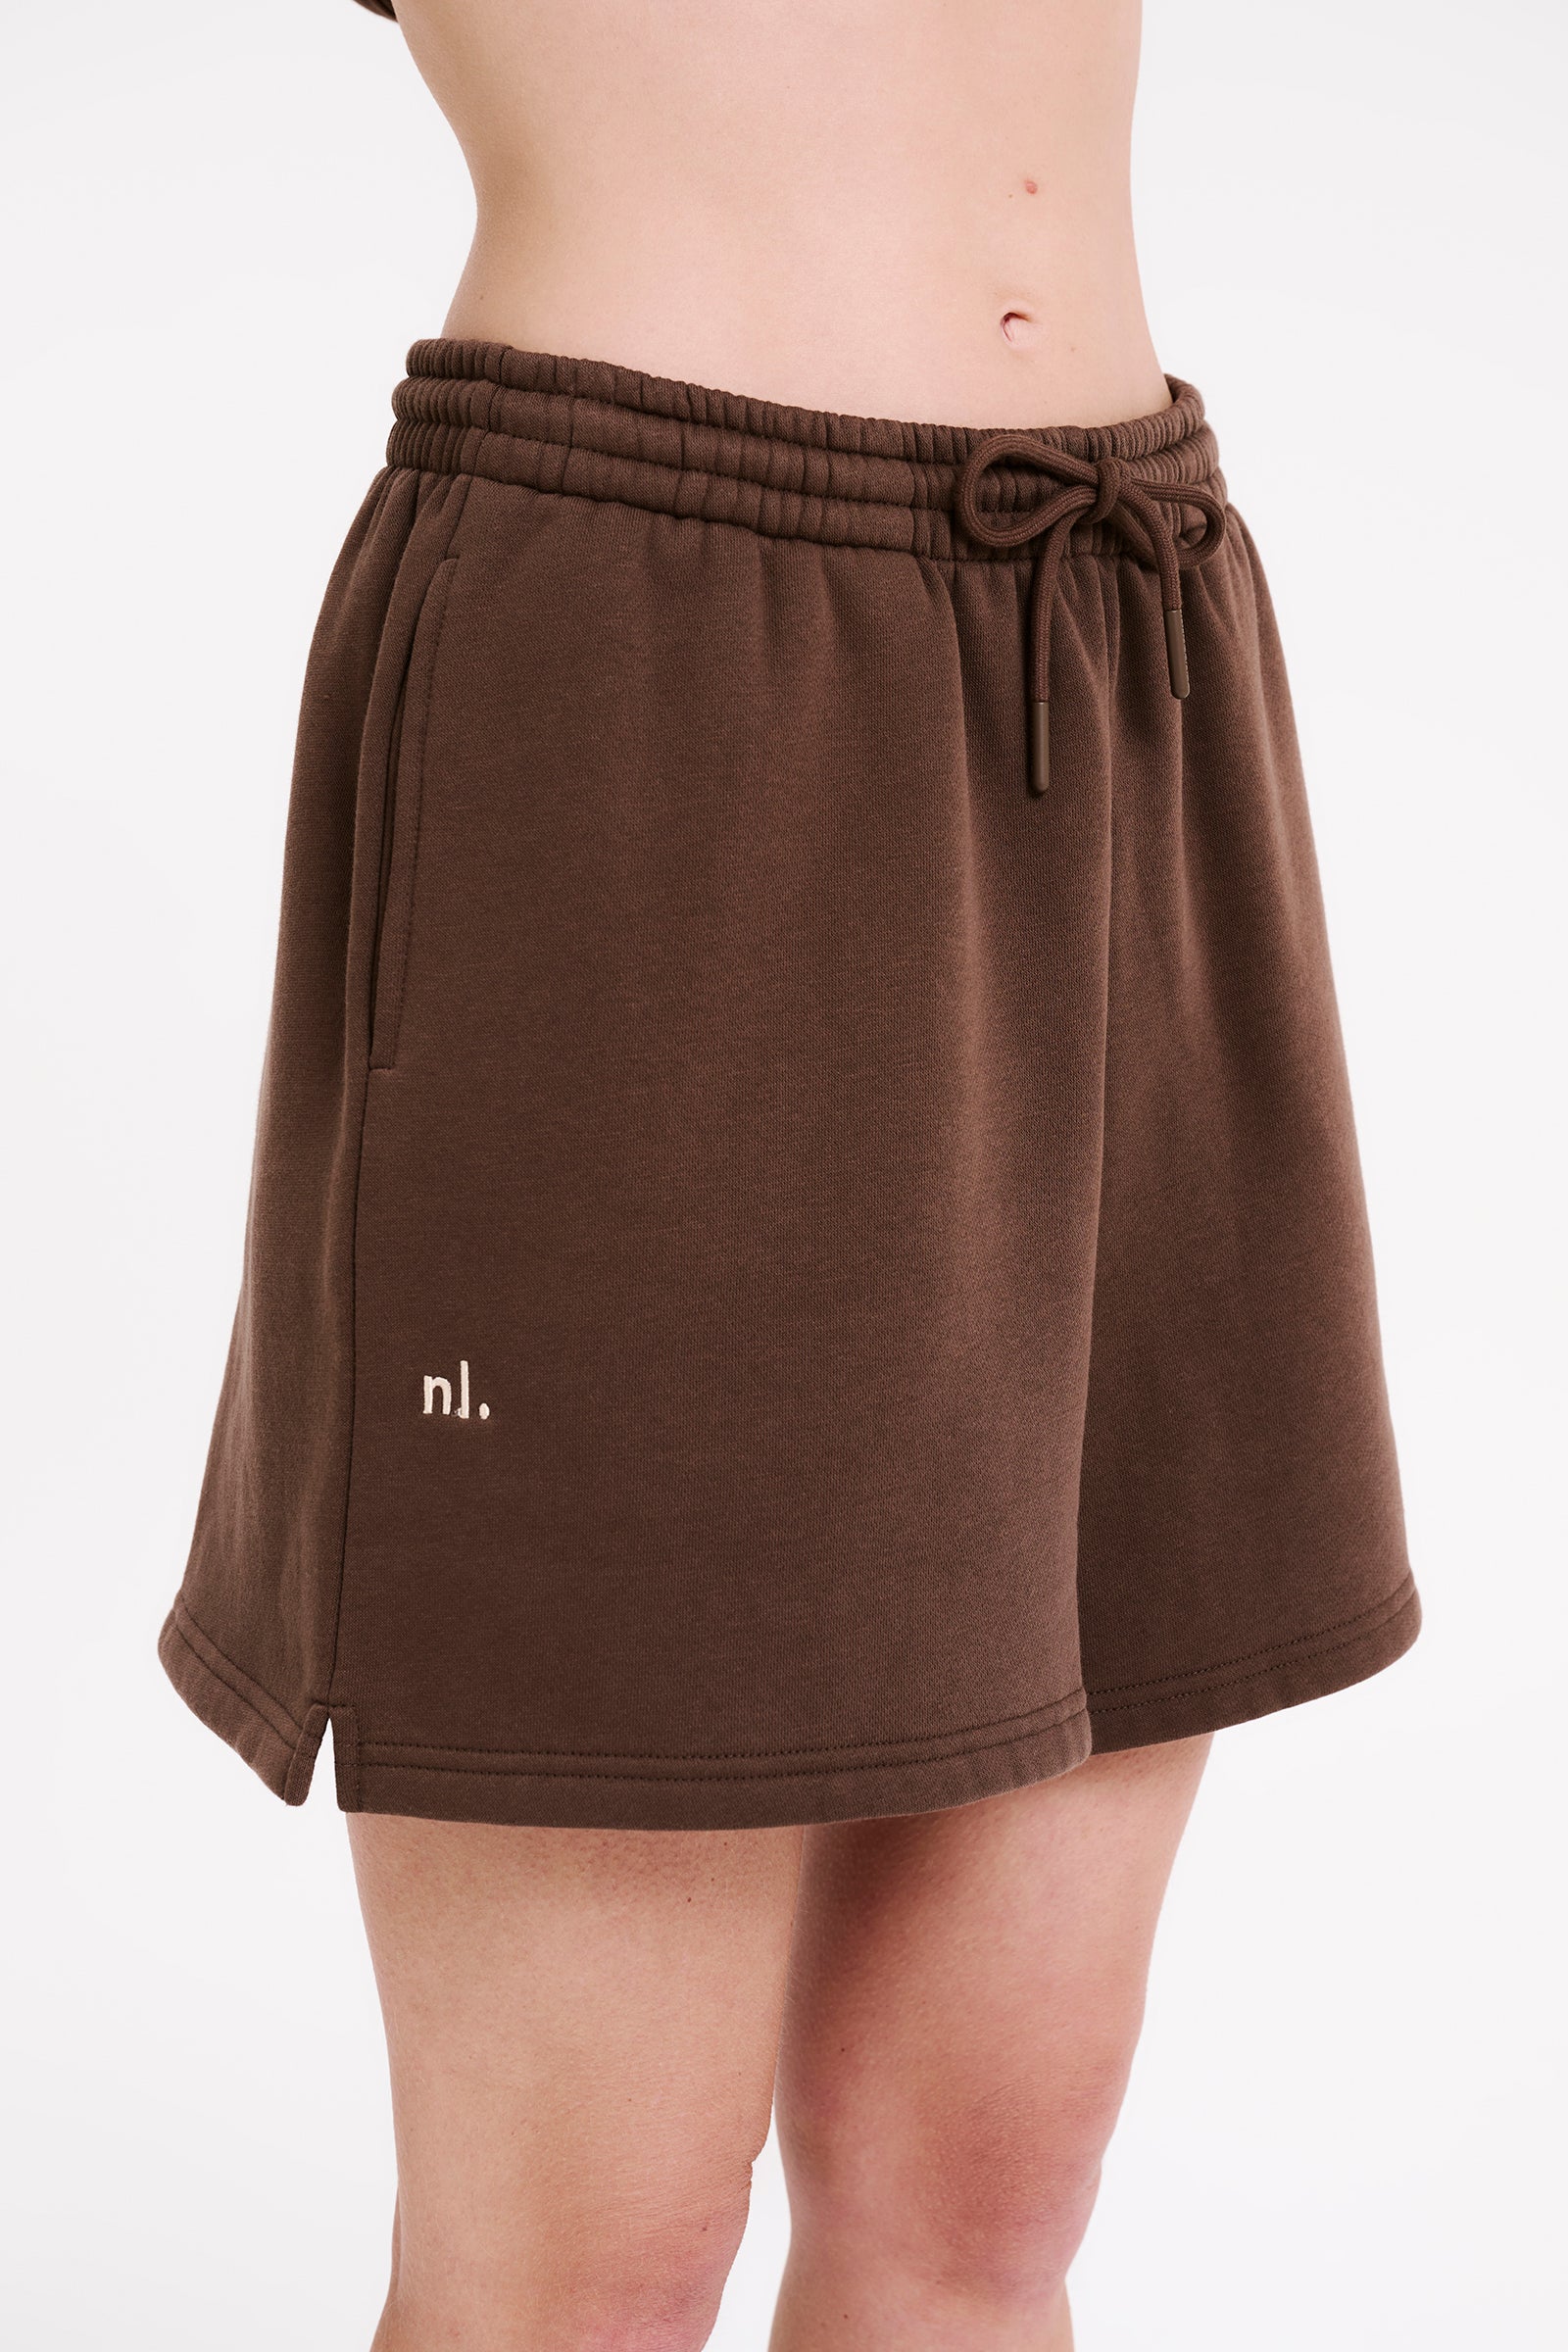 Nude Lucy Carter Curated Short In A Brown Cola Colour 